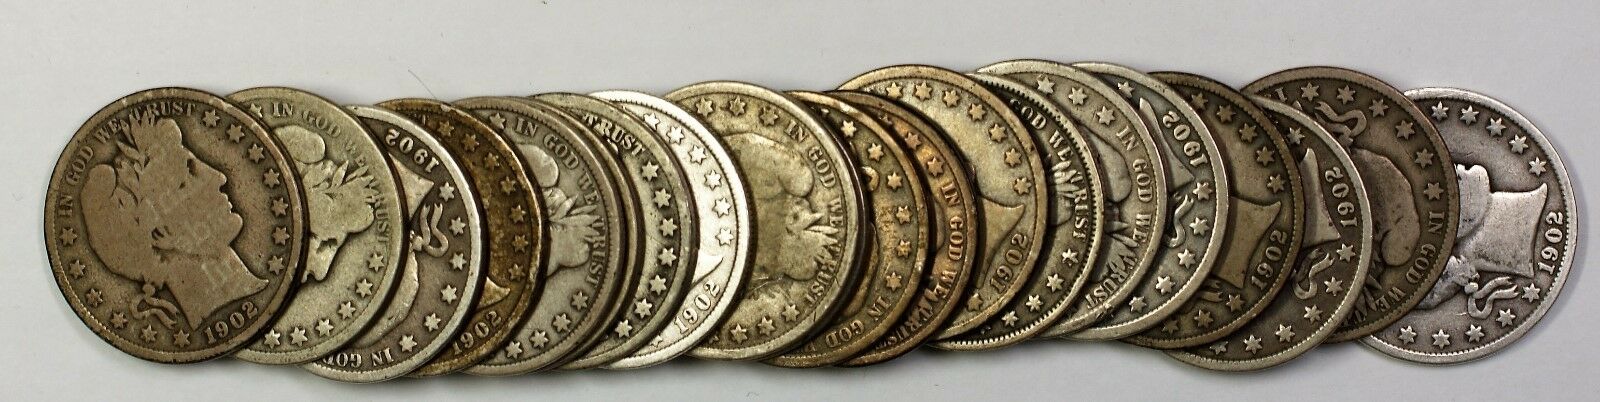 1902 Barber Half Dollar 50c Roll 20 Circulated 90% Old Silver Coins Lot